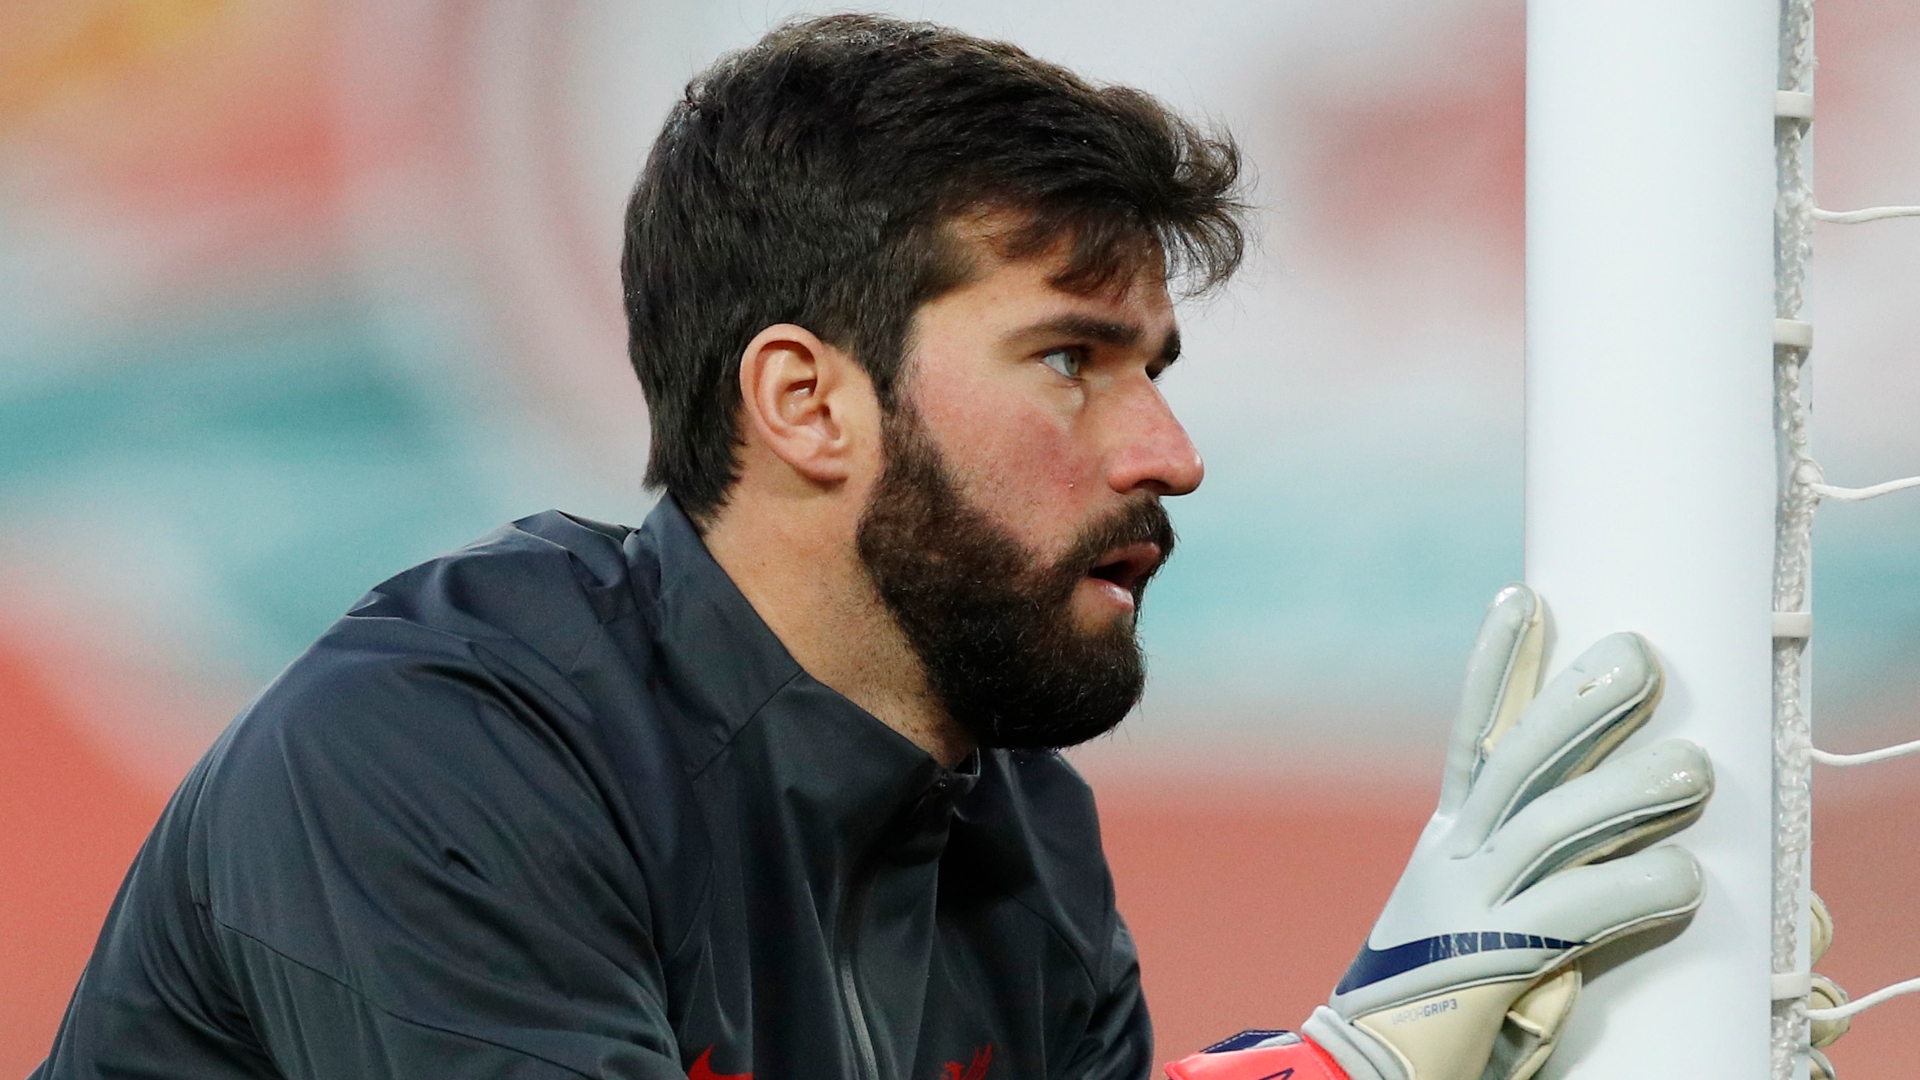 According to widespread reports, the father of Liverpool goalkeeper Alisson has died after drowning.